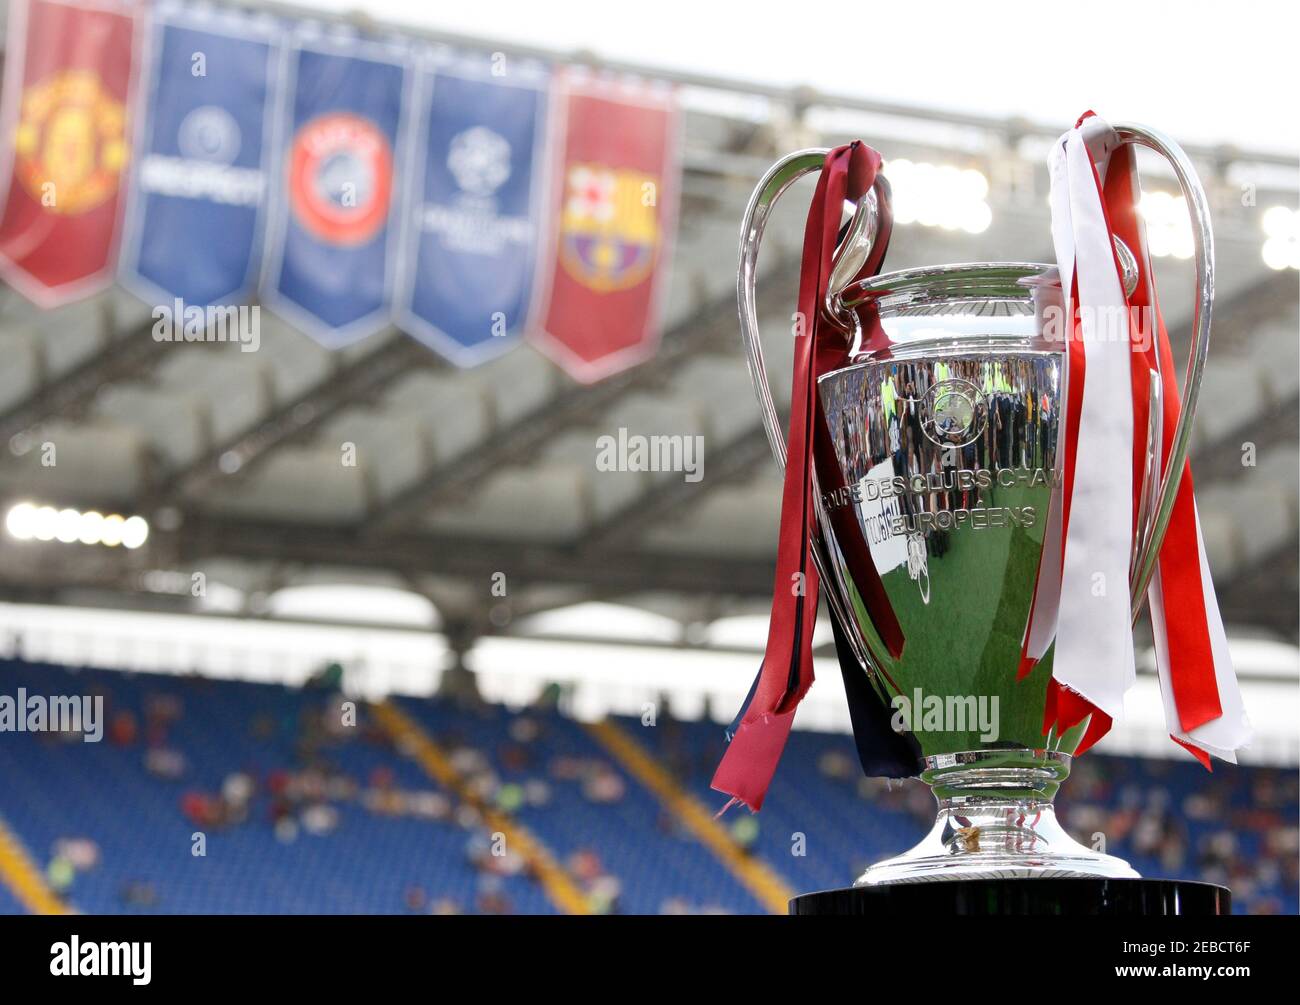 Football - Manchester United v FC Barcelona - 2009 Champions League Final -  Olympic Stadium, Rome, Italy - 08/09 - 27/5/09 UEFA Champions League Trophy  Mandatory Credit: Action Images / John Sibley Stock Photo - Alamy